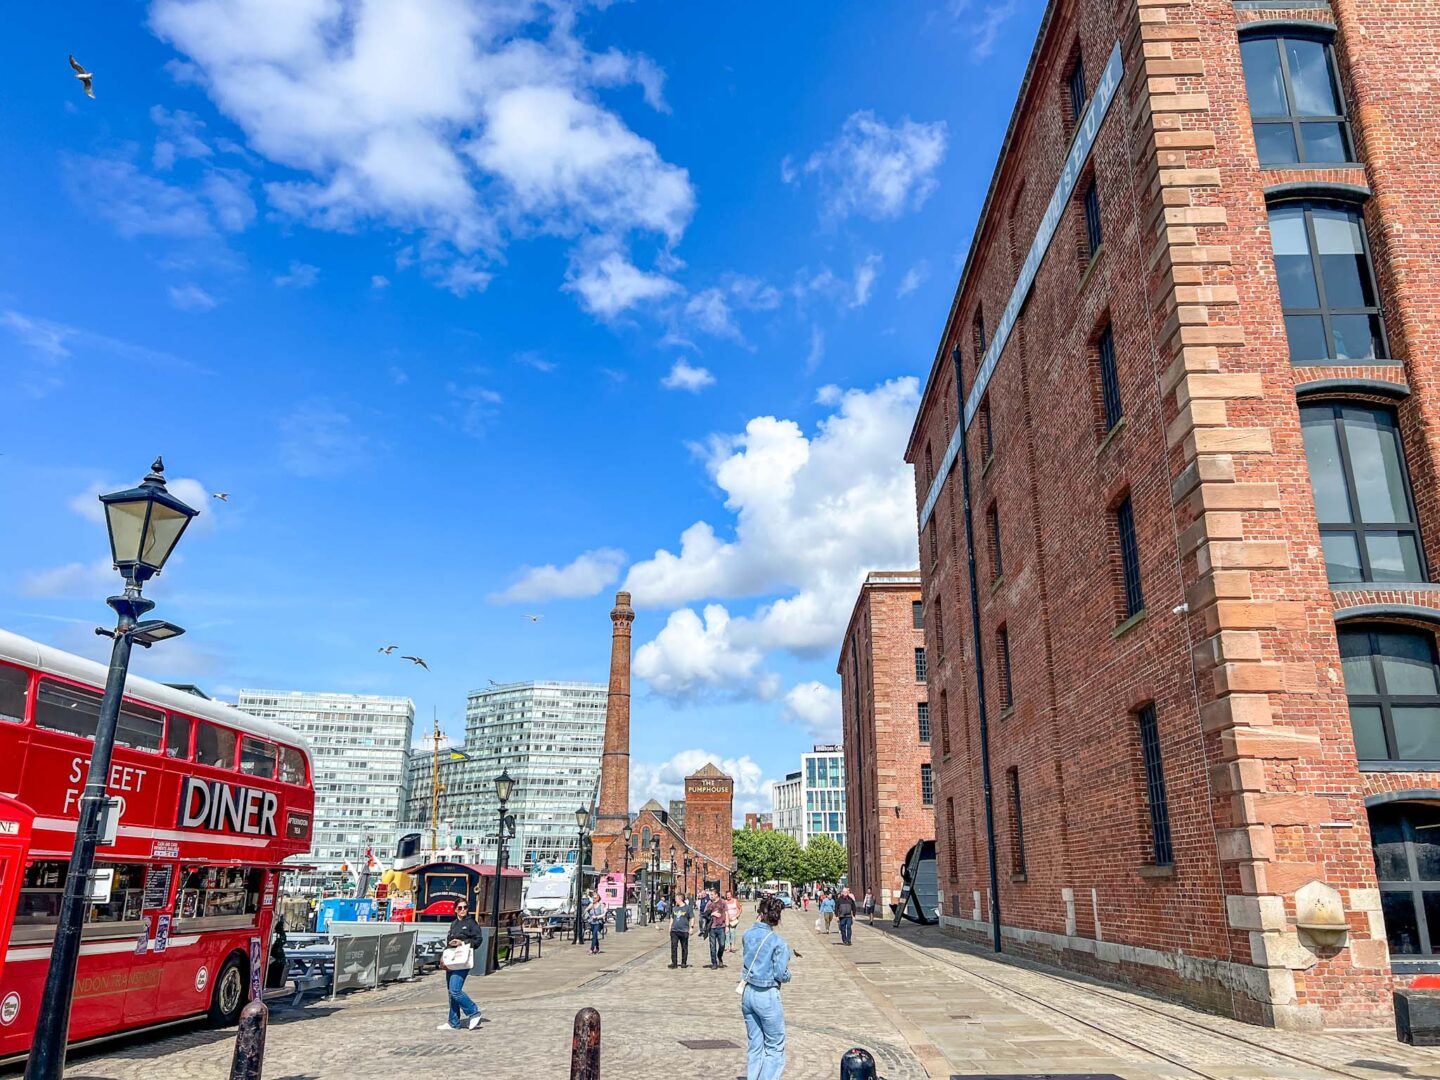 One day in Liverpool, Food trucks on the docks